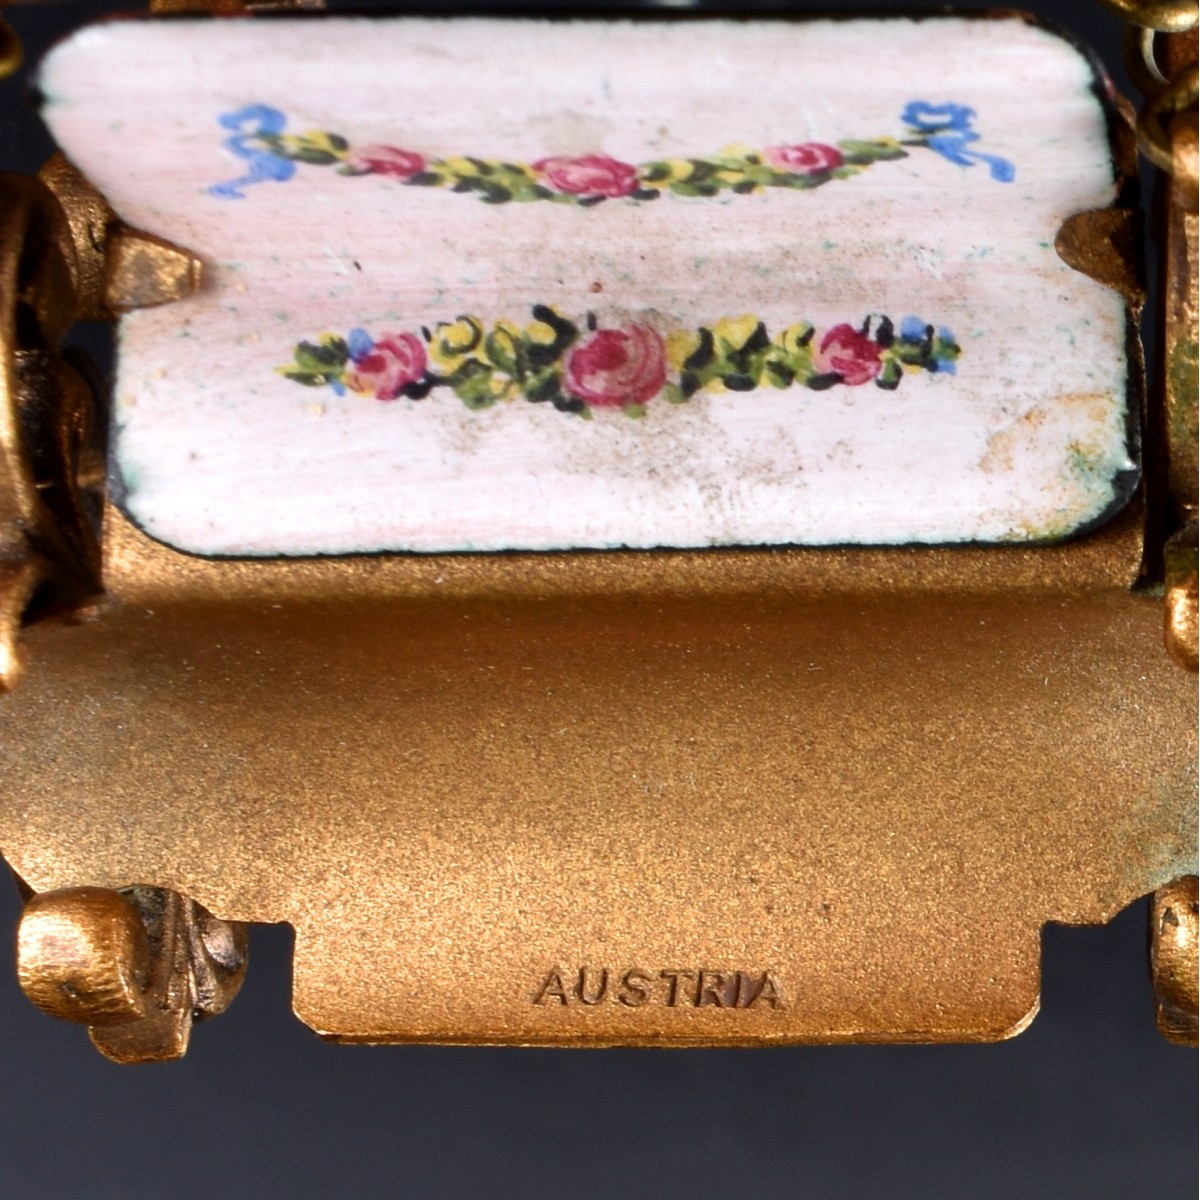 Miniature Enamel and Brass Carriage